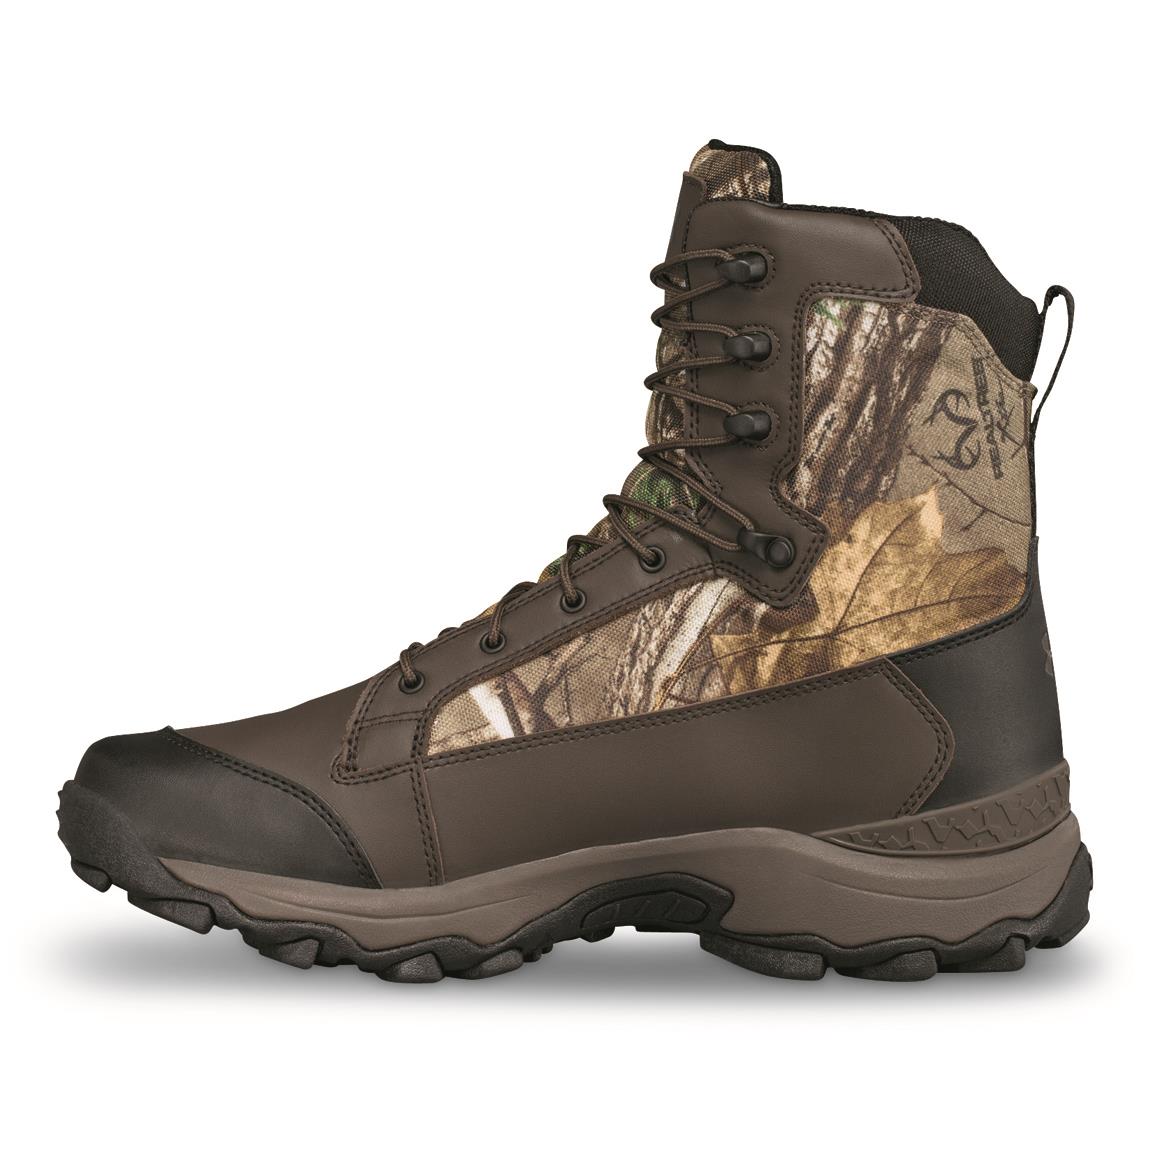 Tanger Waterproof Hunting Boots 